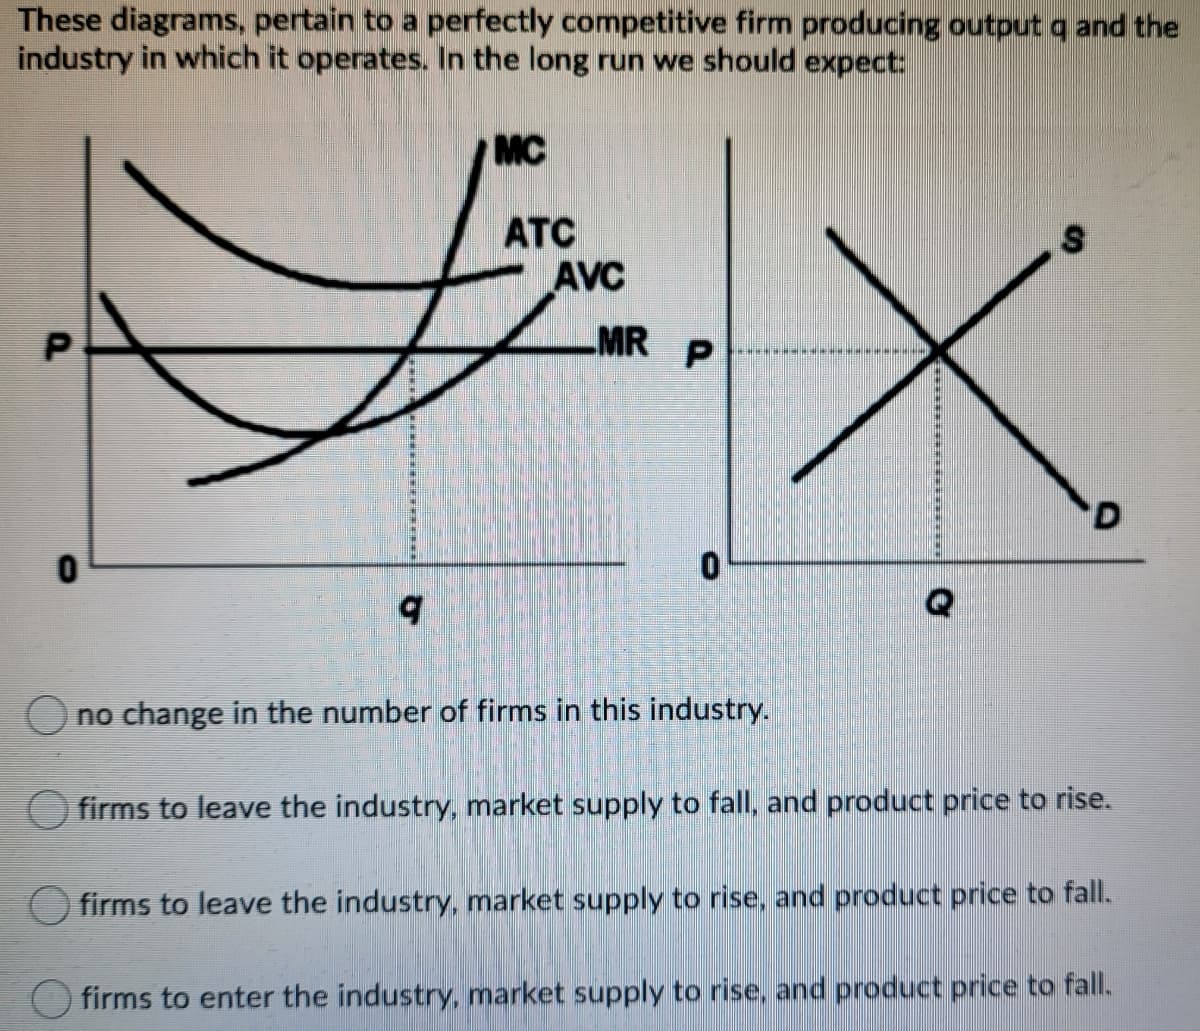 These diagrams, pertain to a perfectly competitive firm producing output q and the
industry in which it operates. In the long run we should expect:
MC
ATC
AVC
MR P
Ono change in the number of firms in this industry.
firms to leave the industry, market supply to fall, and product price to rise.
firms to leave the industry, market supply to rise, and product price to fall.
firms to enter the industry, market supply to rise, and product price to fall.
